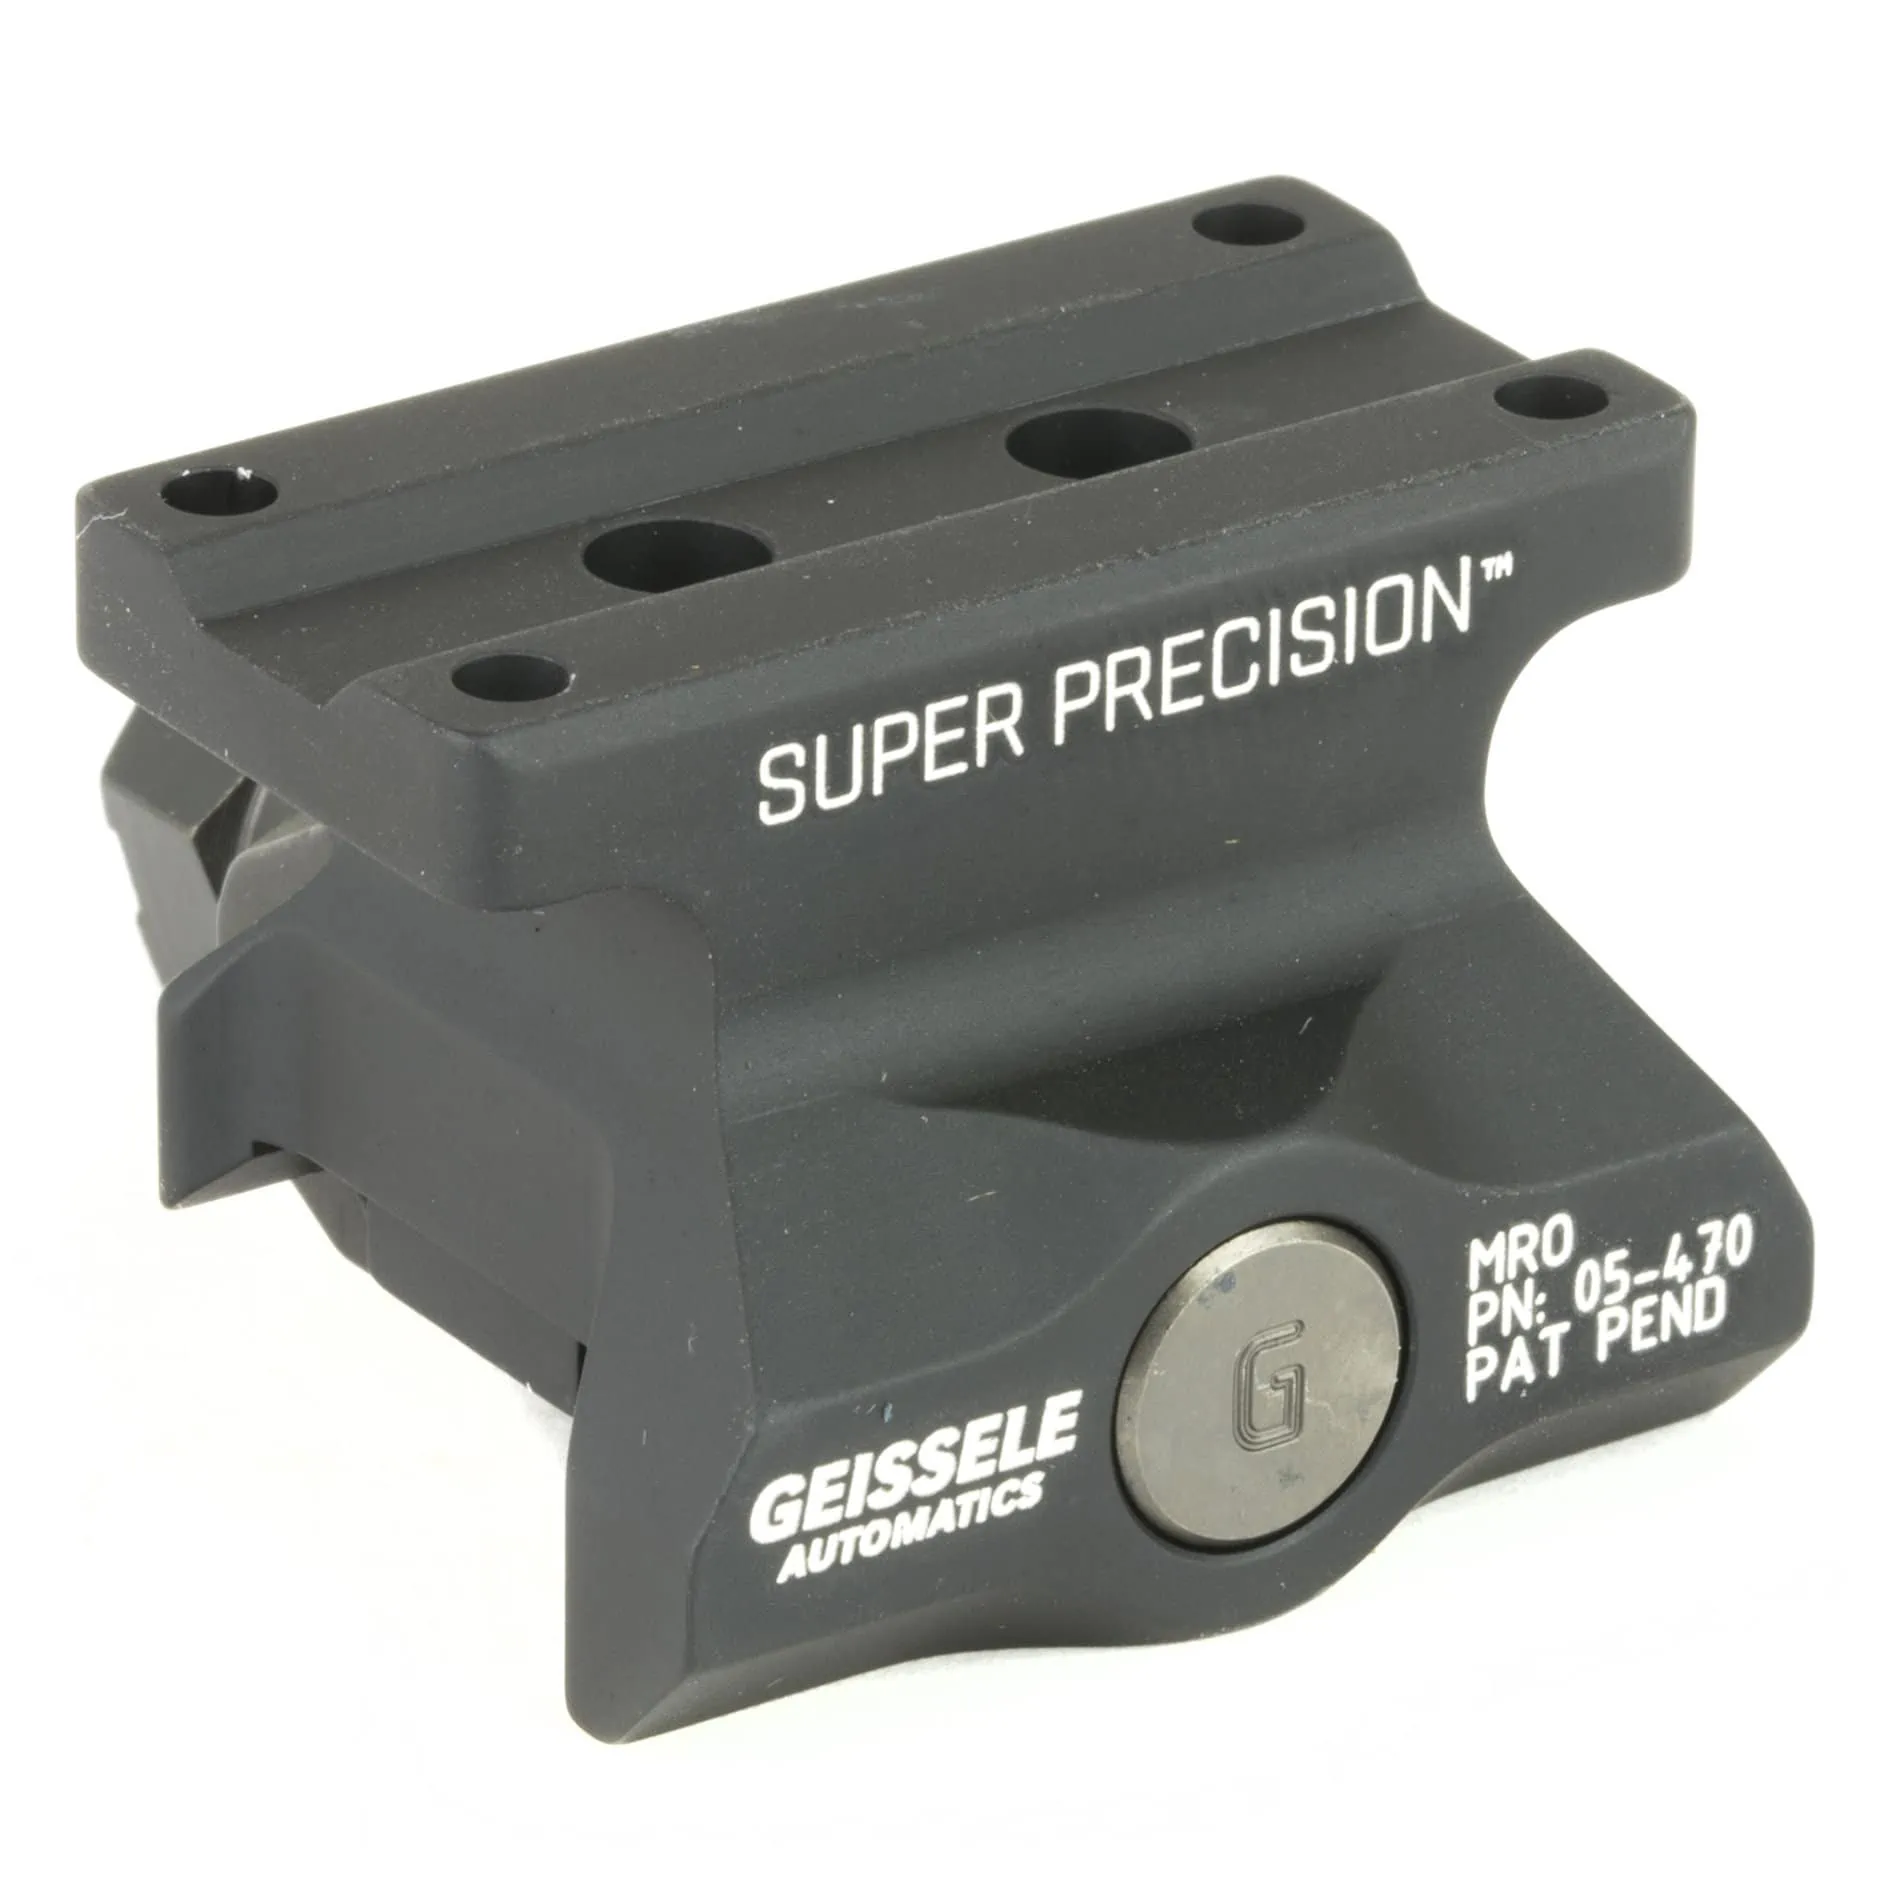 Geissele Automatics Super Precision Lower 1/3 Cowitness Mount for Trijicon MRO - AT3 Tactical